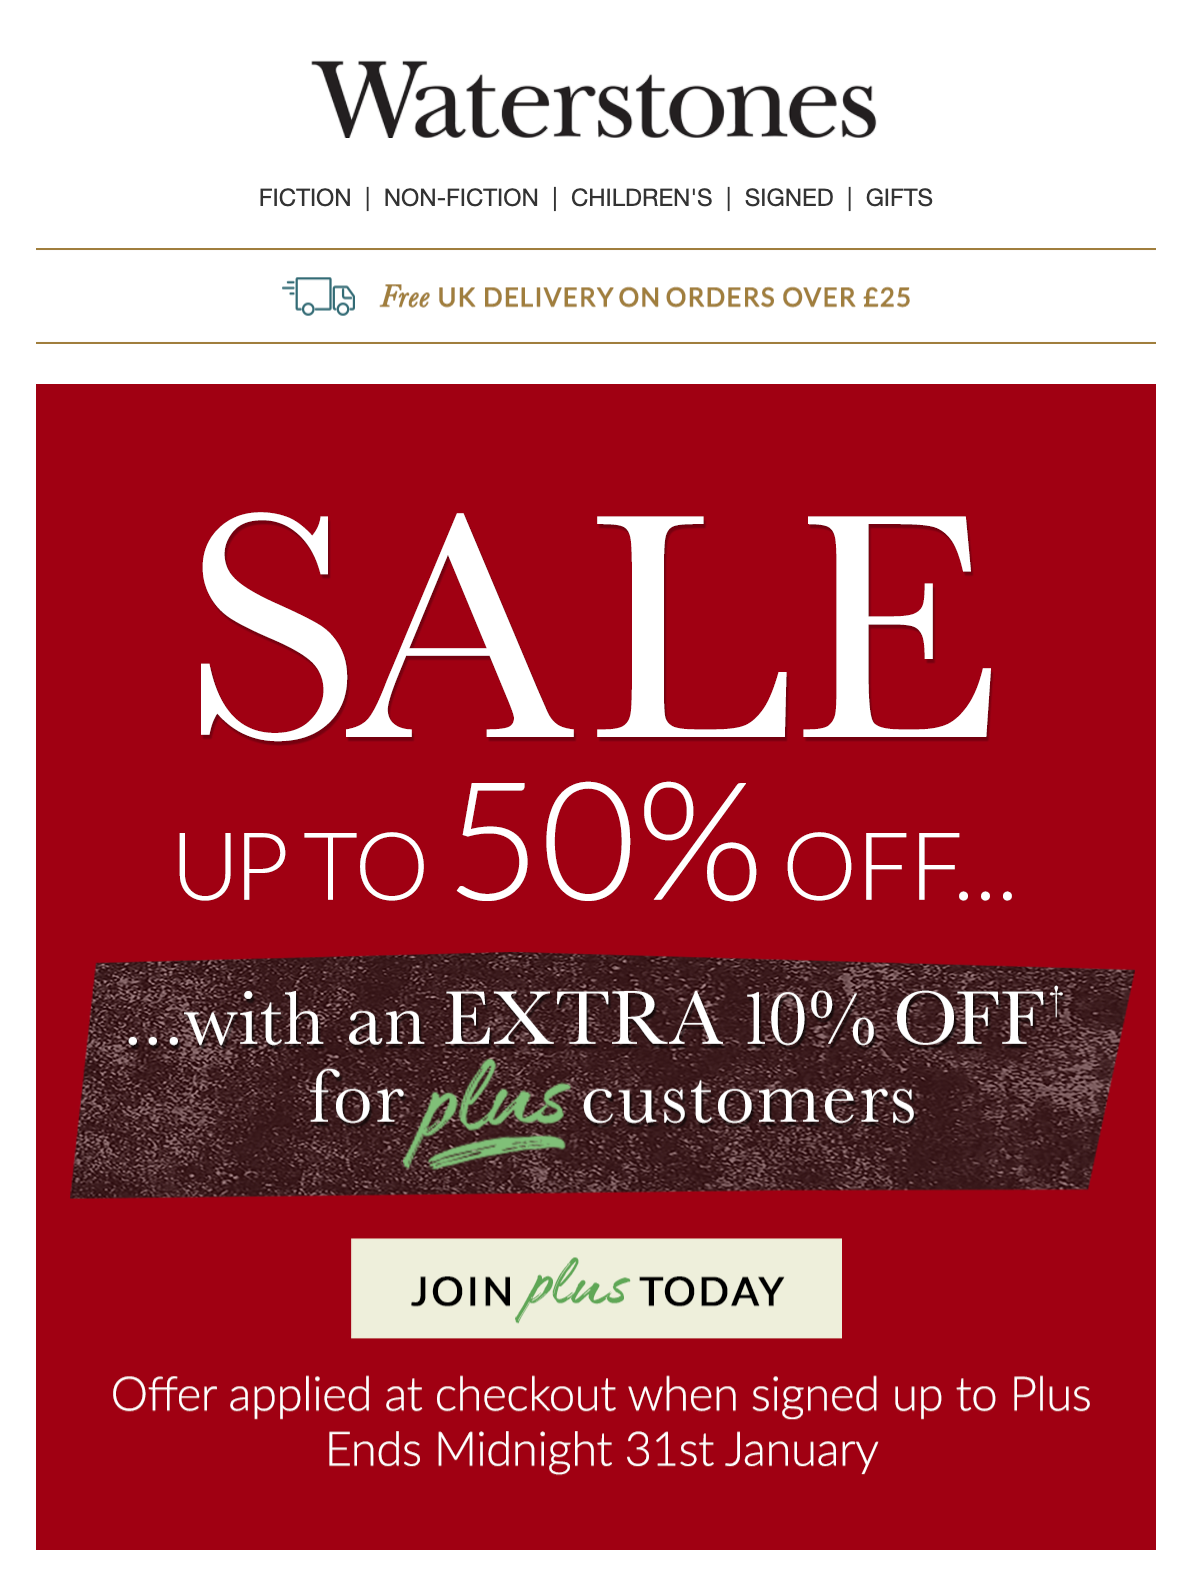 Waterstones post holiday sales email example